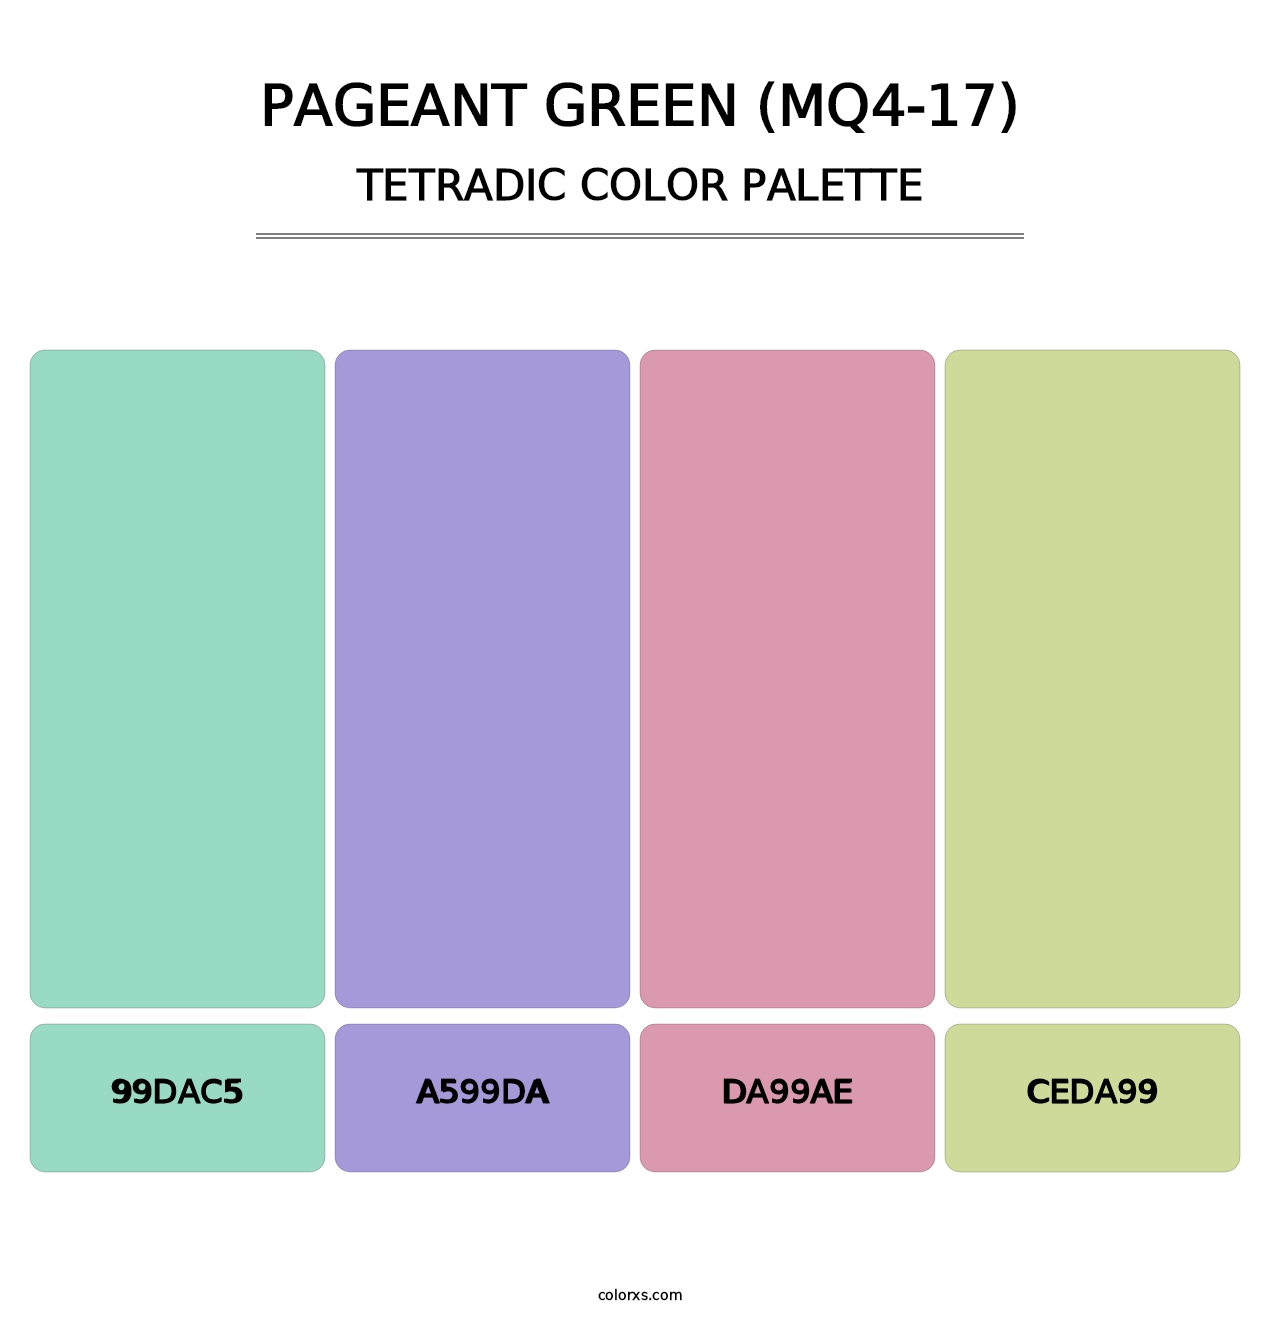 Pageant Green (MQ4-17) - Tetradic Color Palette